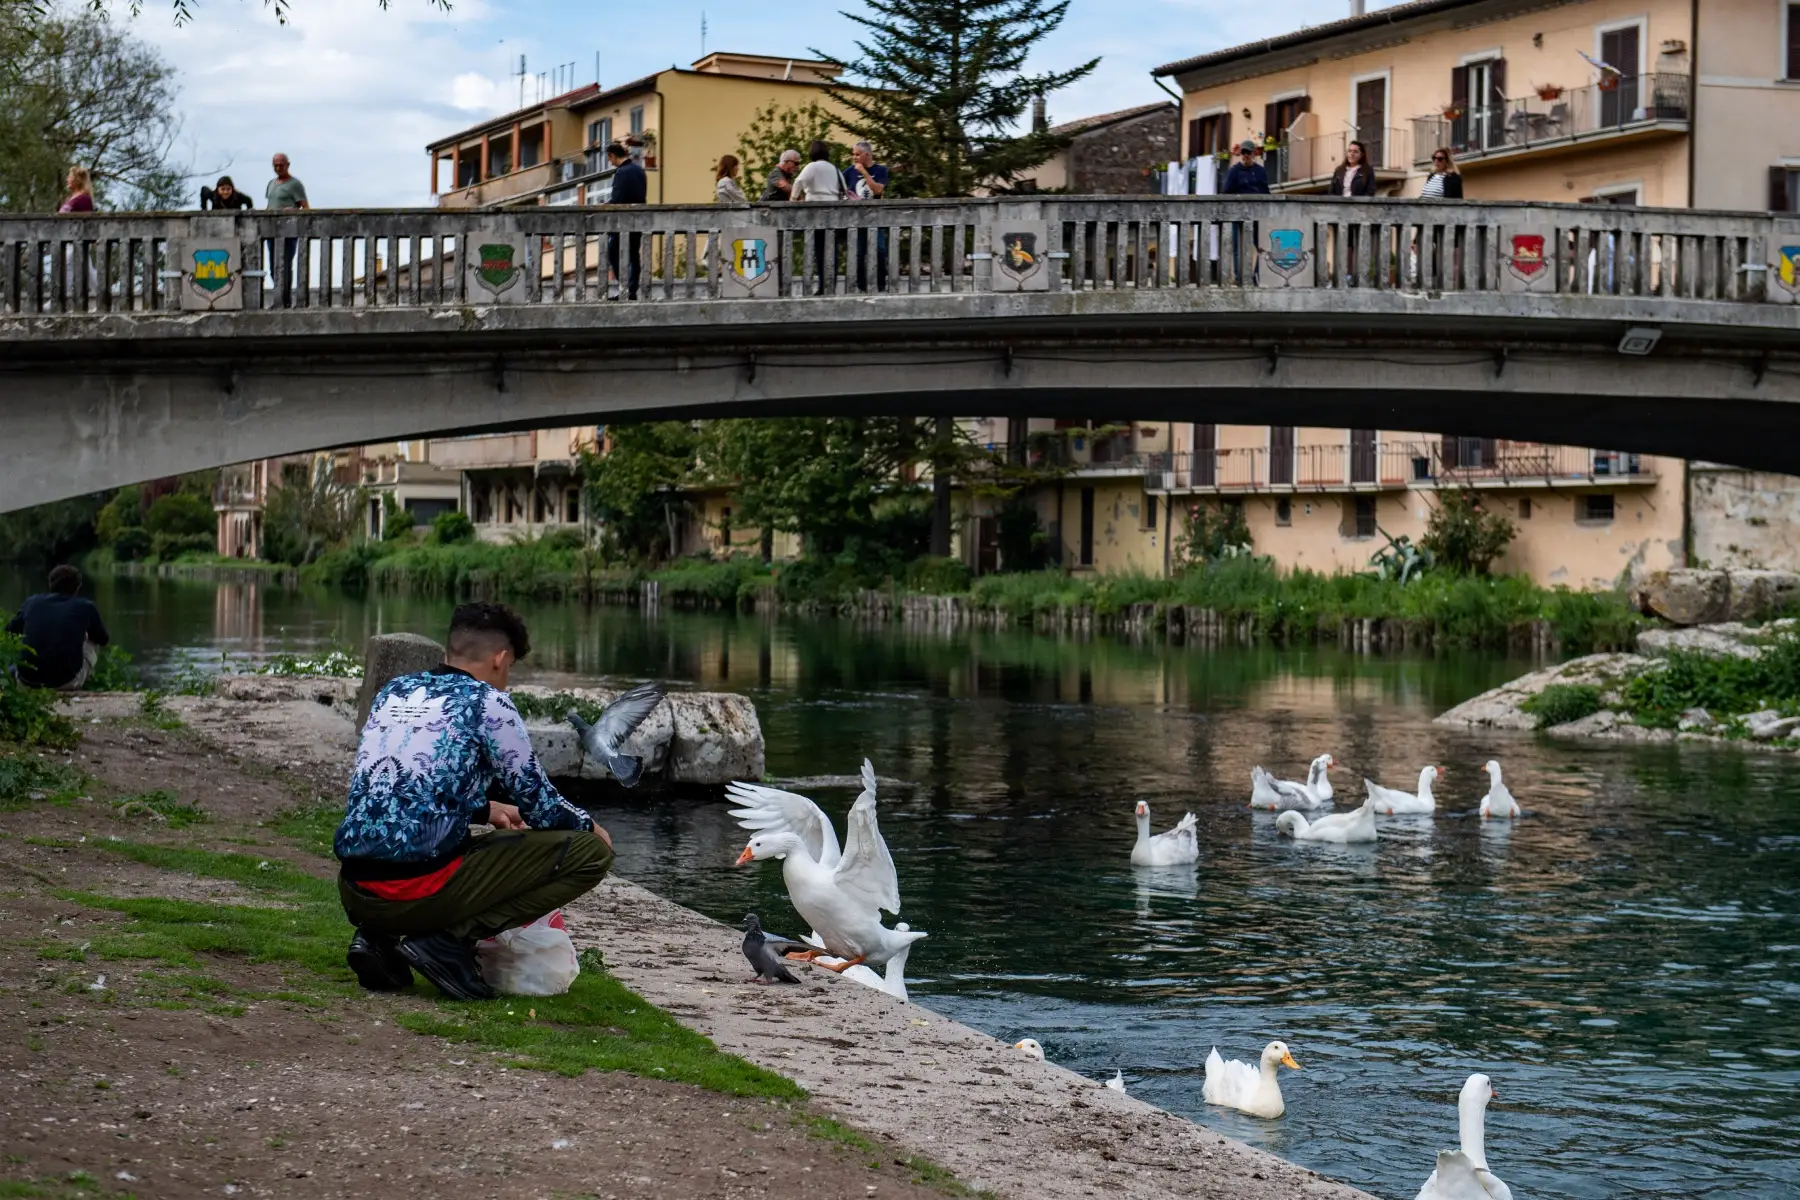 Young man feeding ducks while people cross bridge in background in Rieti, Italy